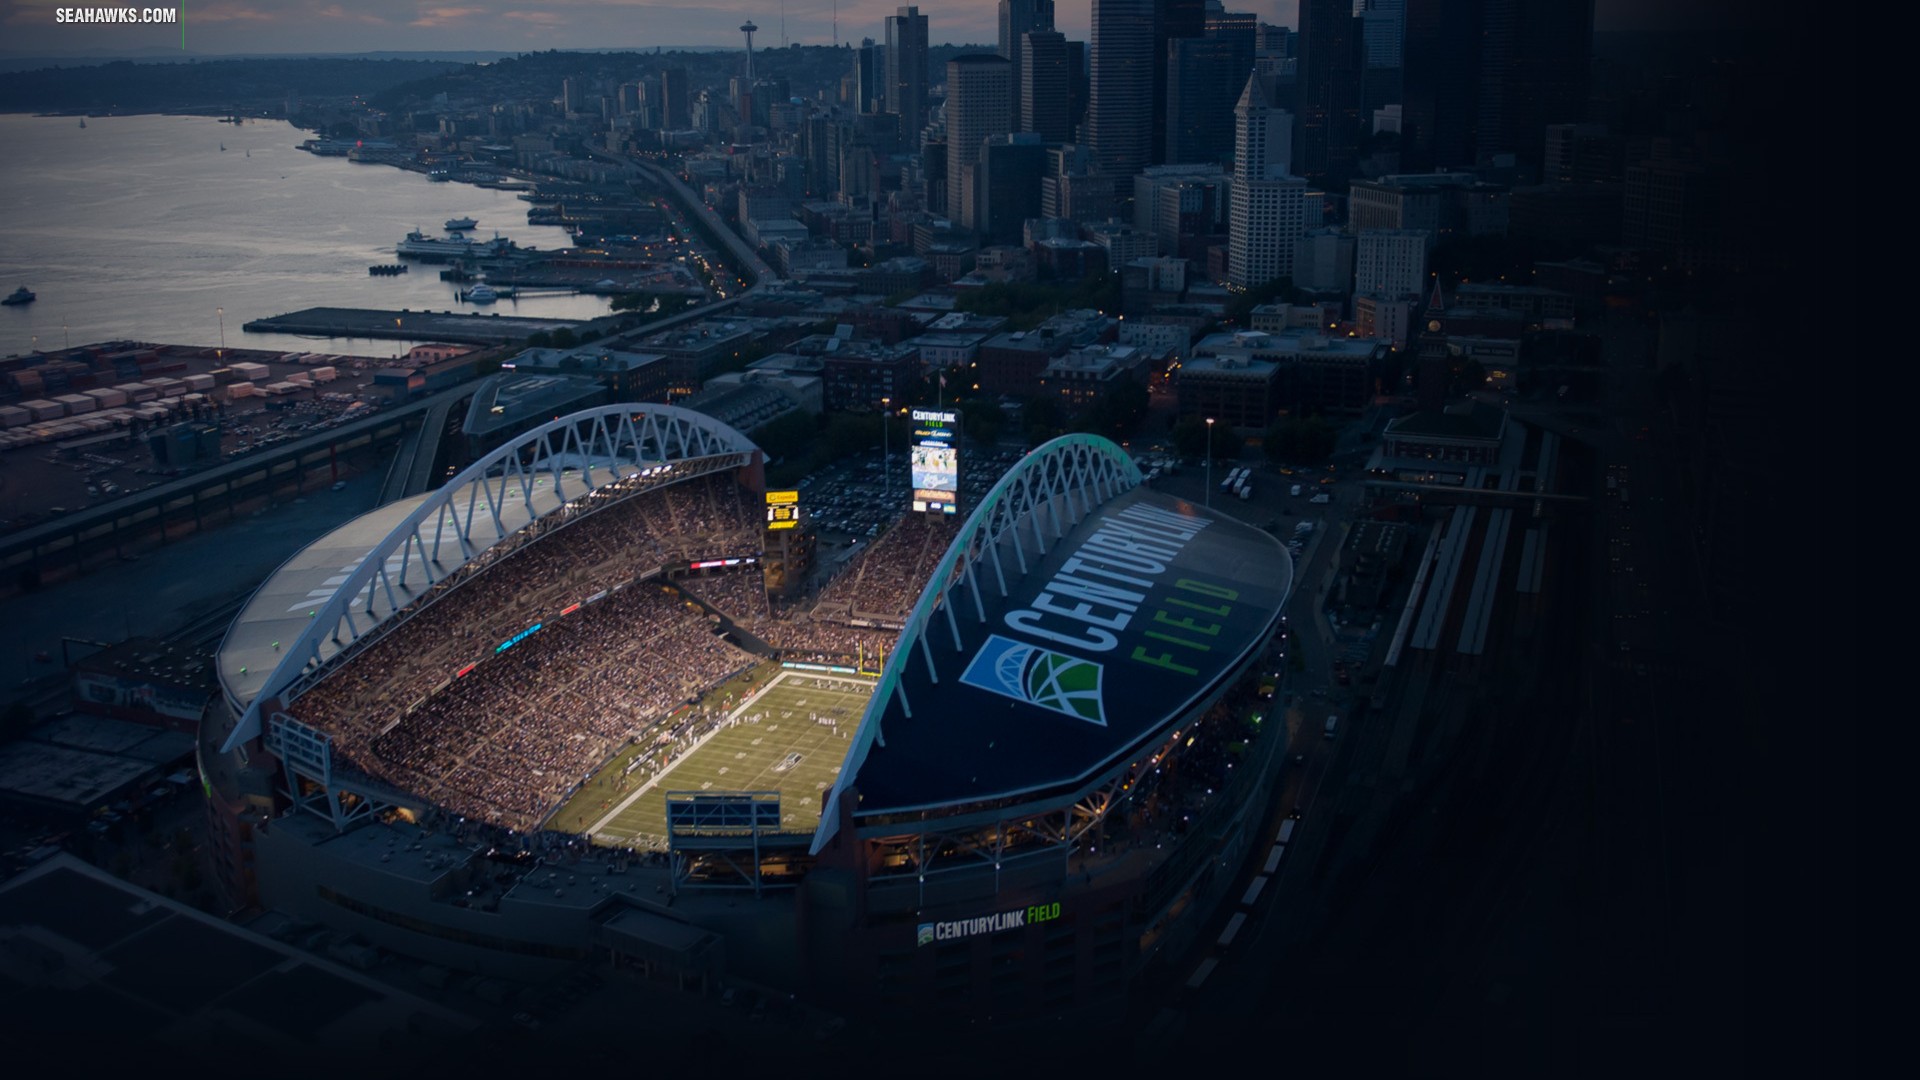 Seattle Seahawks Desktop Wallpaper with high-resolution 1920x1080 pixel. You can use this wallpaper for your Mac or Windows Desktop Background, iPhone, Android or Tablet and another Smartphone device